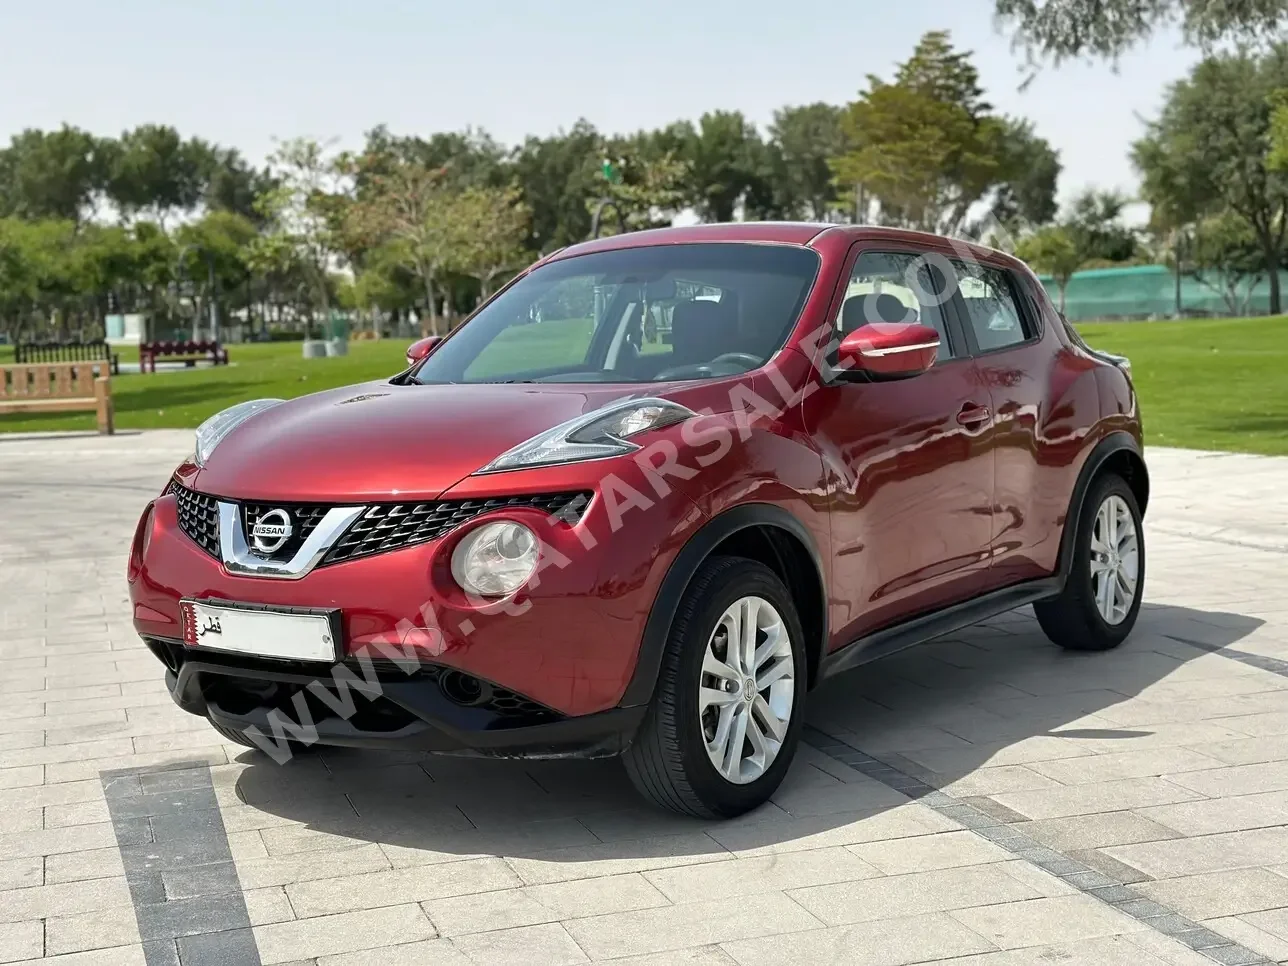 Nissan  Juke  2015  Automatic  152,000 Km  4 Cylinder  Front Wheel Drive (FWD)  SUV  Red